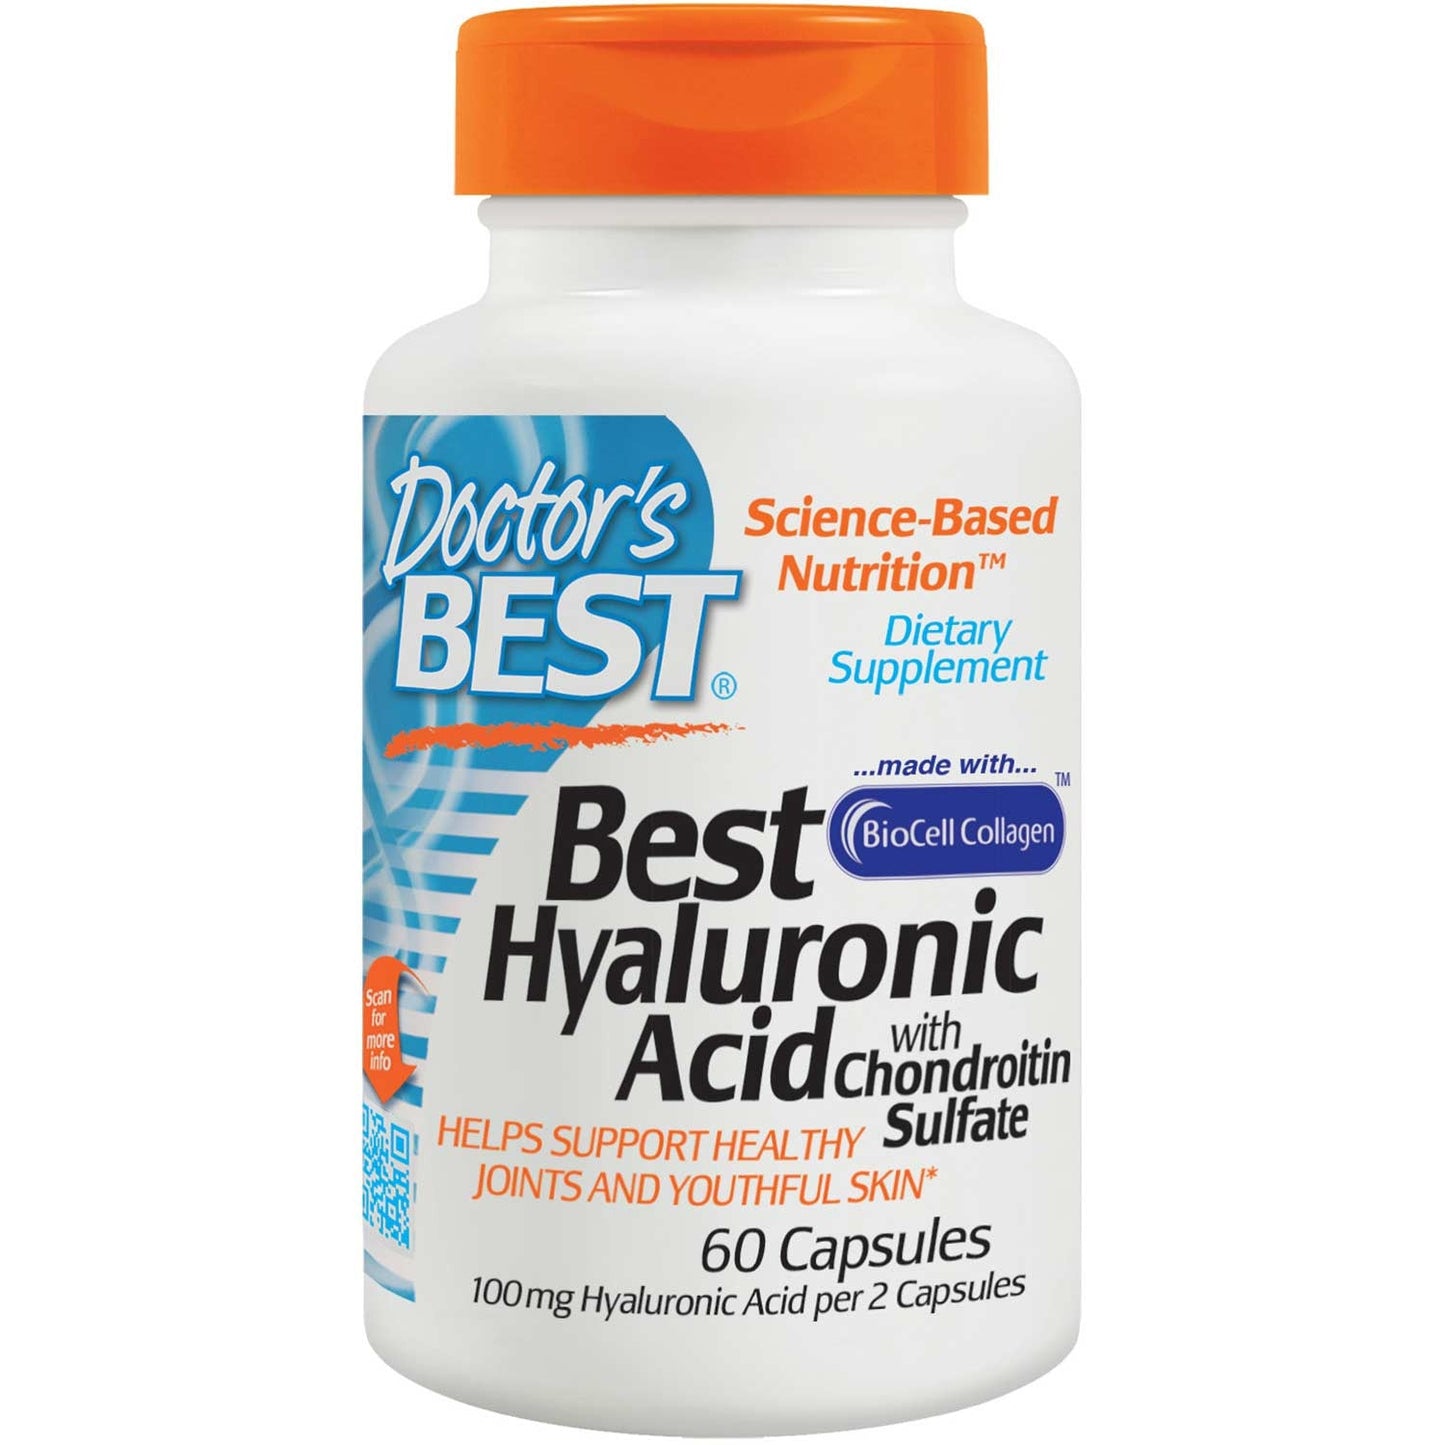 Doctor's Best Hyaluronic Acid with Chondroitin Sulfate, 60 caps-NaturesWisdom